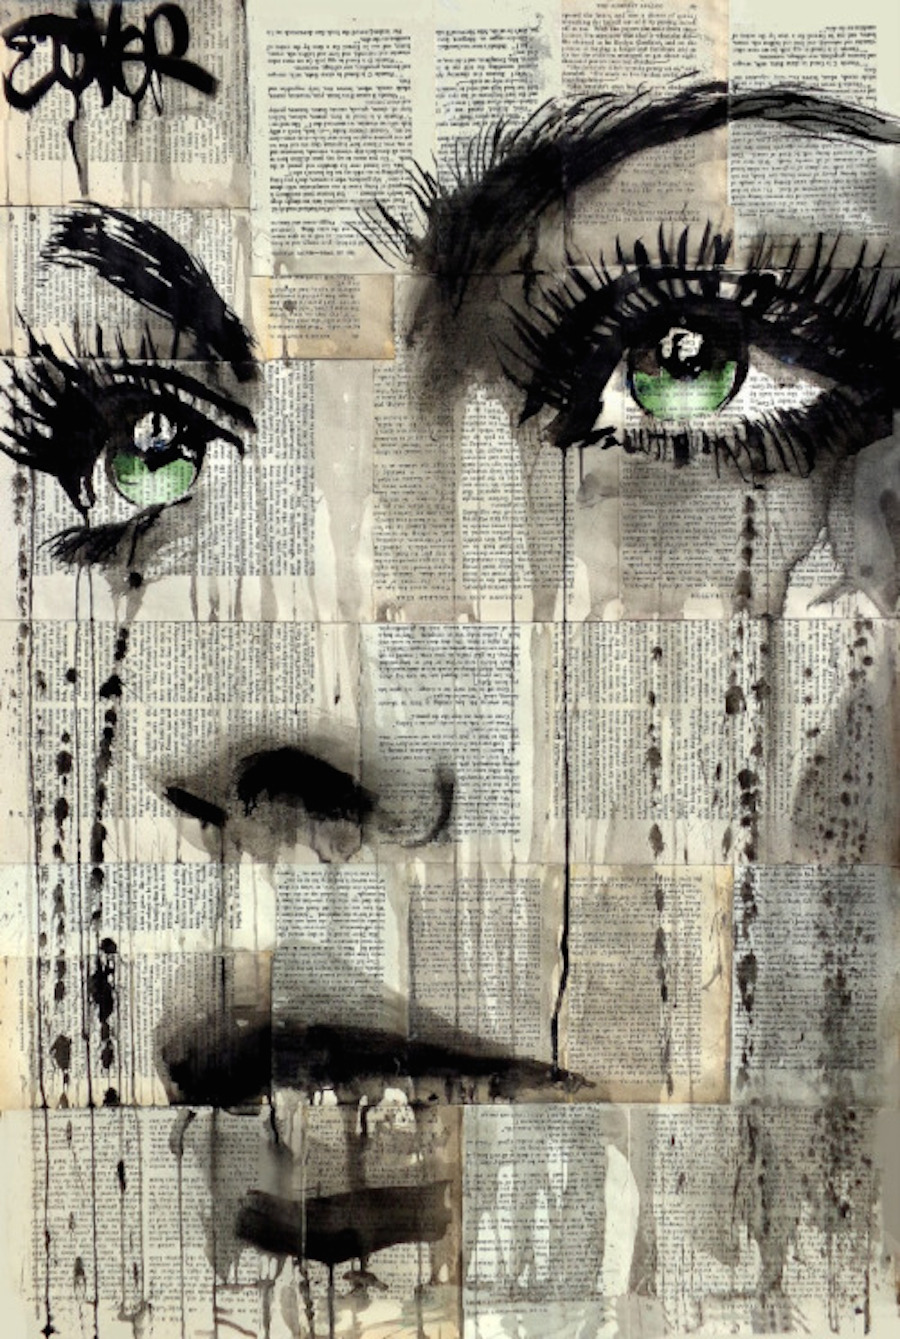 Realistic Women Portraits on Newspapers-7